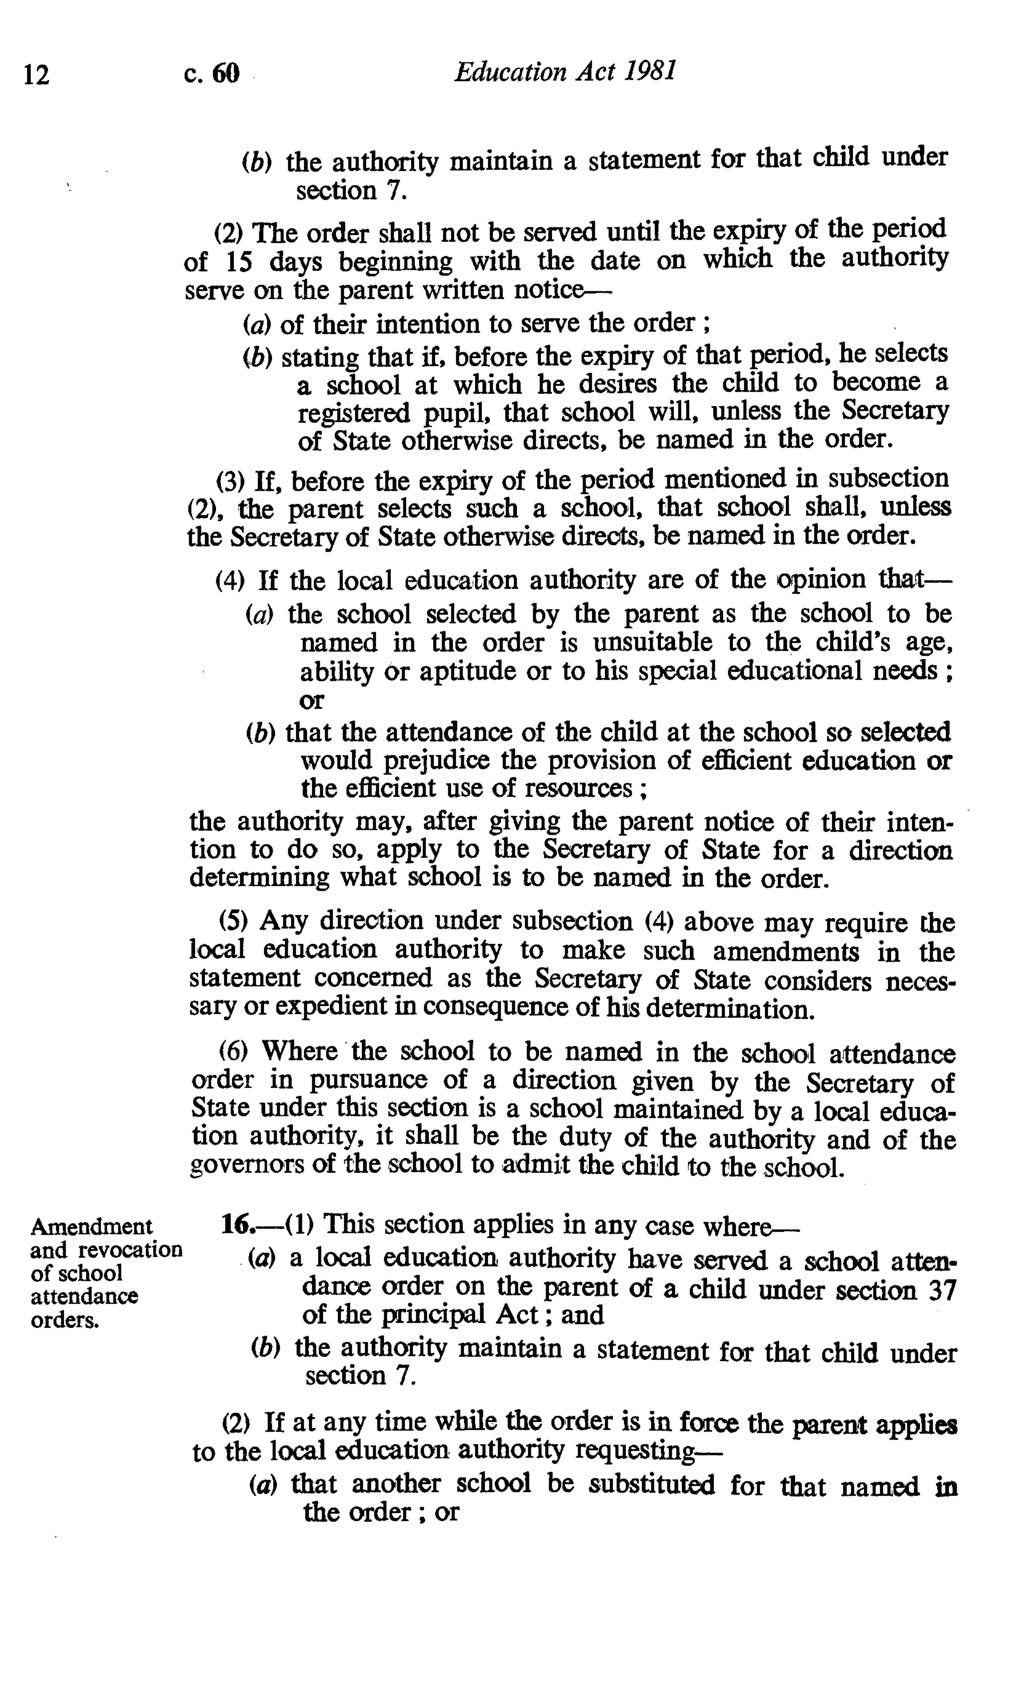 12 c.60 Education Act 1981 (b) the authority maintain a statement for that child under section 7.